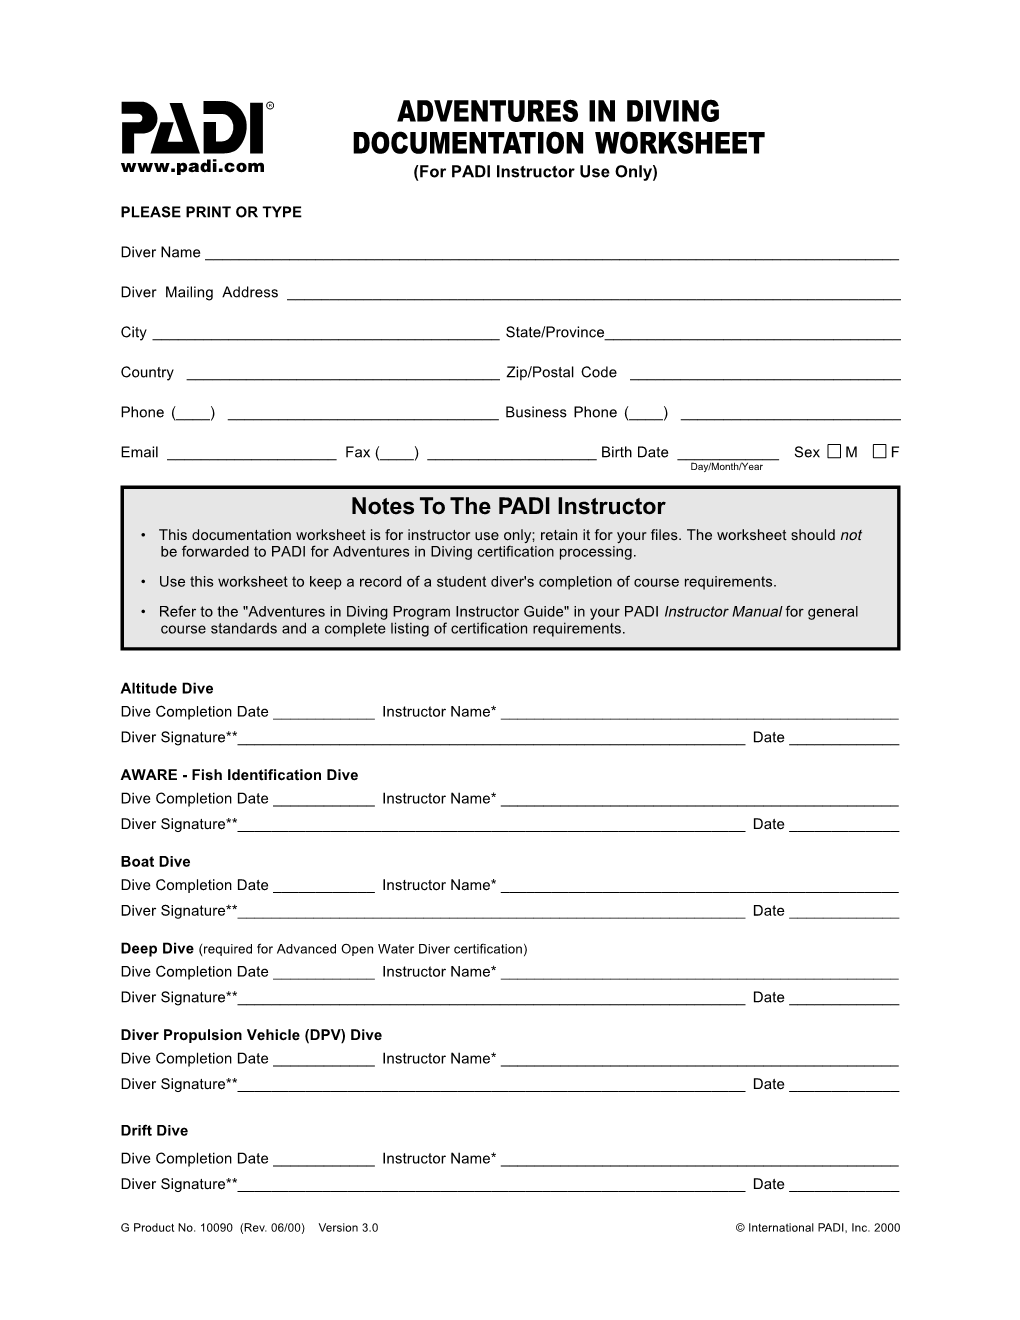 ADVENTURES in DIVING DOCUMENTATION WORKSHEET (For PADI Instructor Use Only)